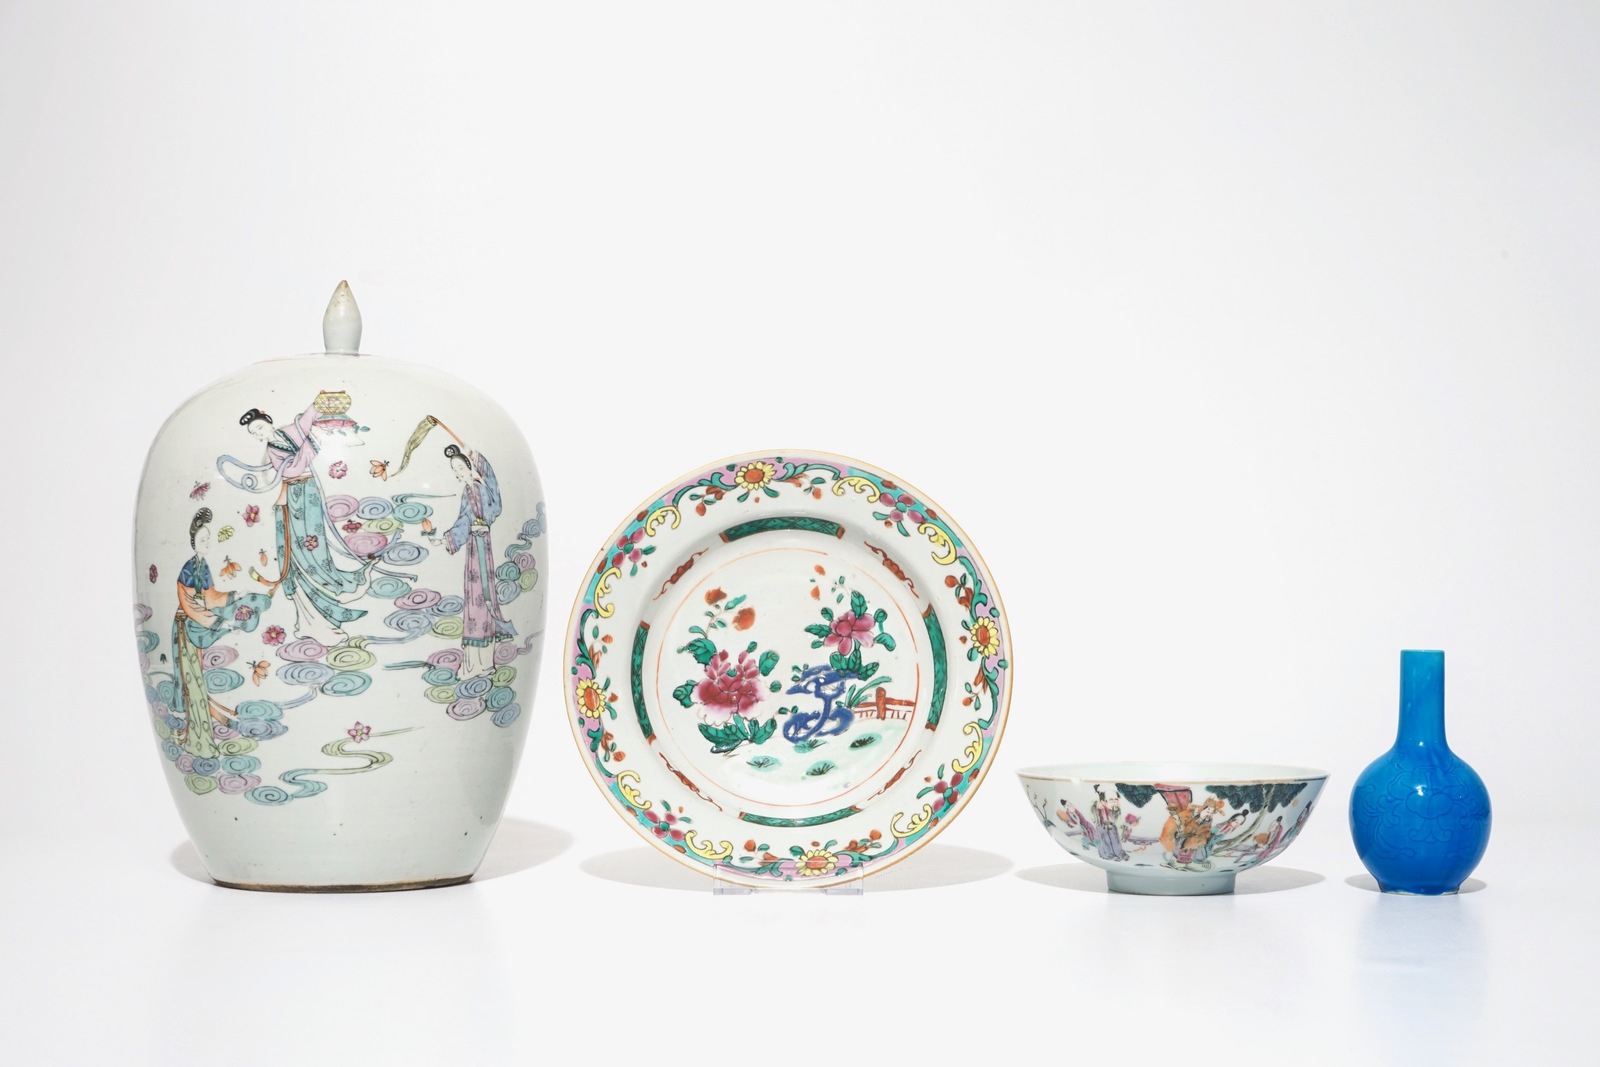 A varied lot of Chinese famille rose and monochrome porcelain, 19/20th C. H.: 32,5 cm (the ginger